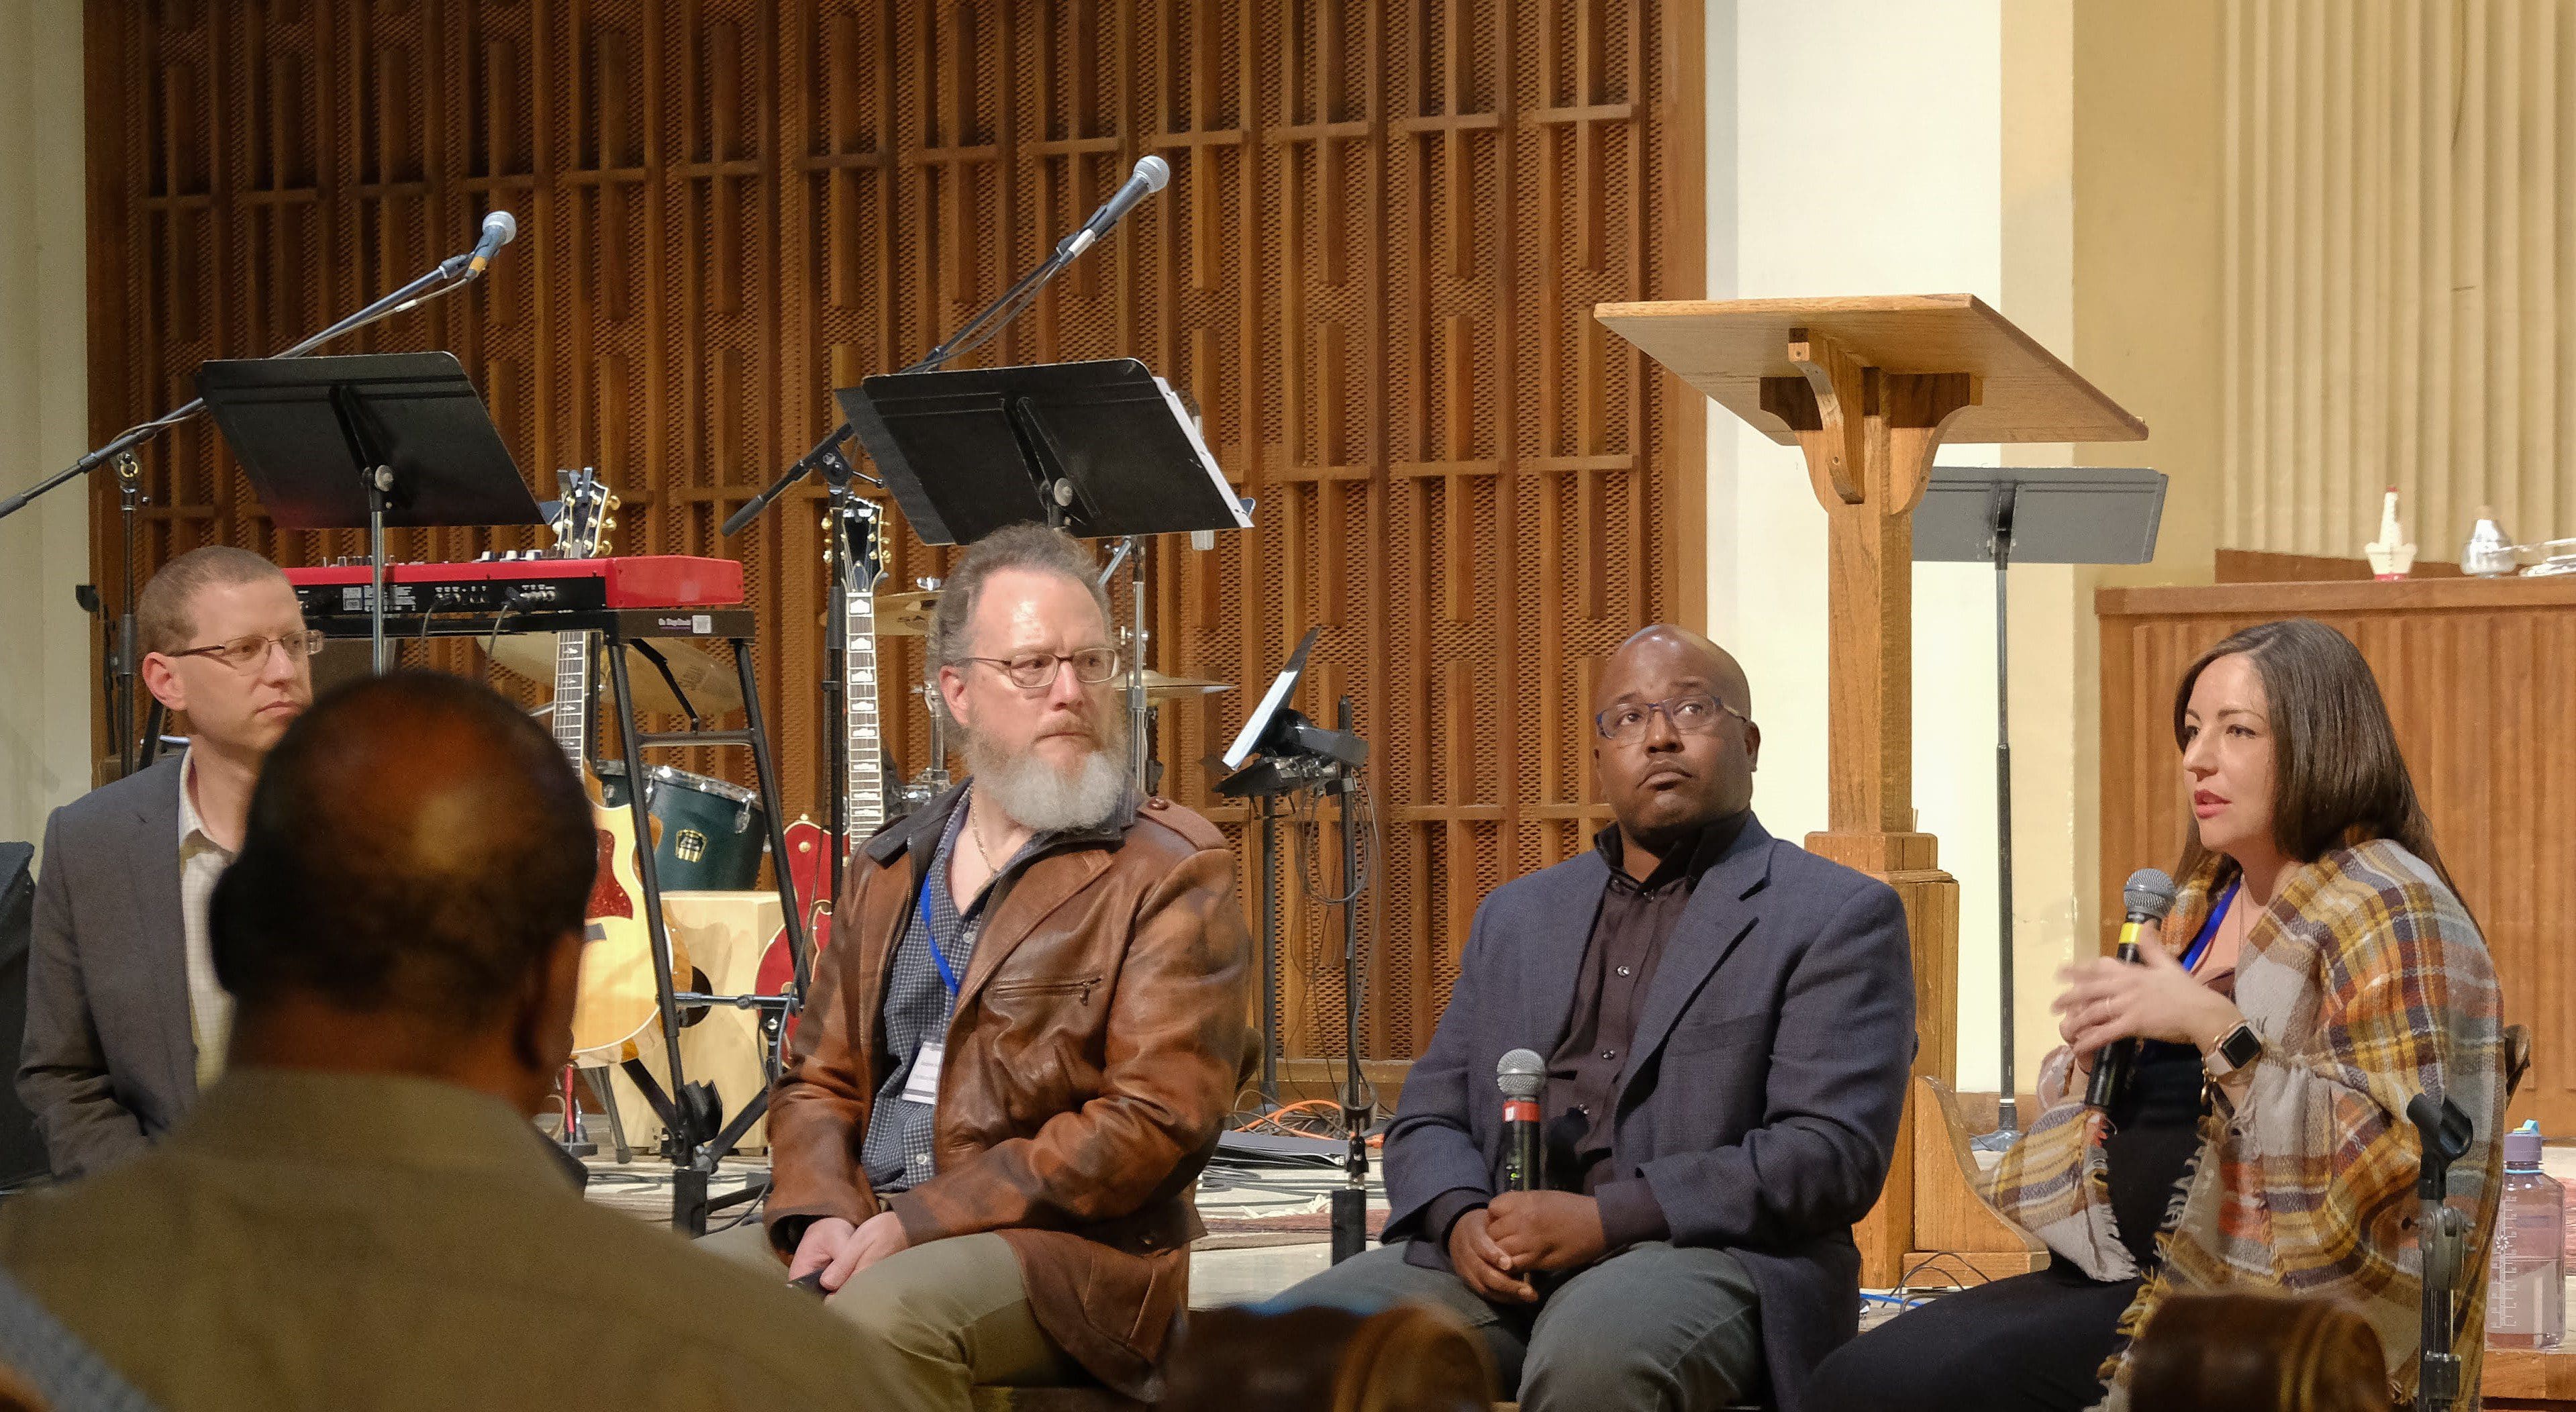 Trinity’s Counseling Center Director Stephanie Griswold, Psy.D., recently took part in a panel discussion on how the church in general and pastors in particular can help care for victims of trauma and abuse.